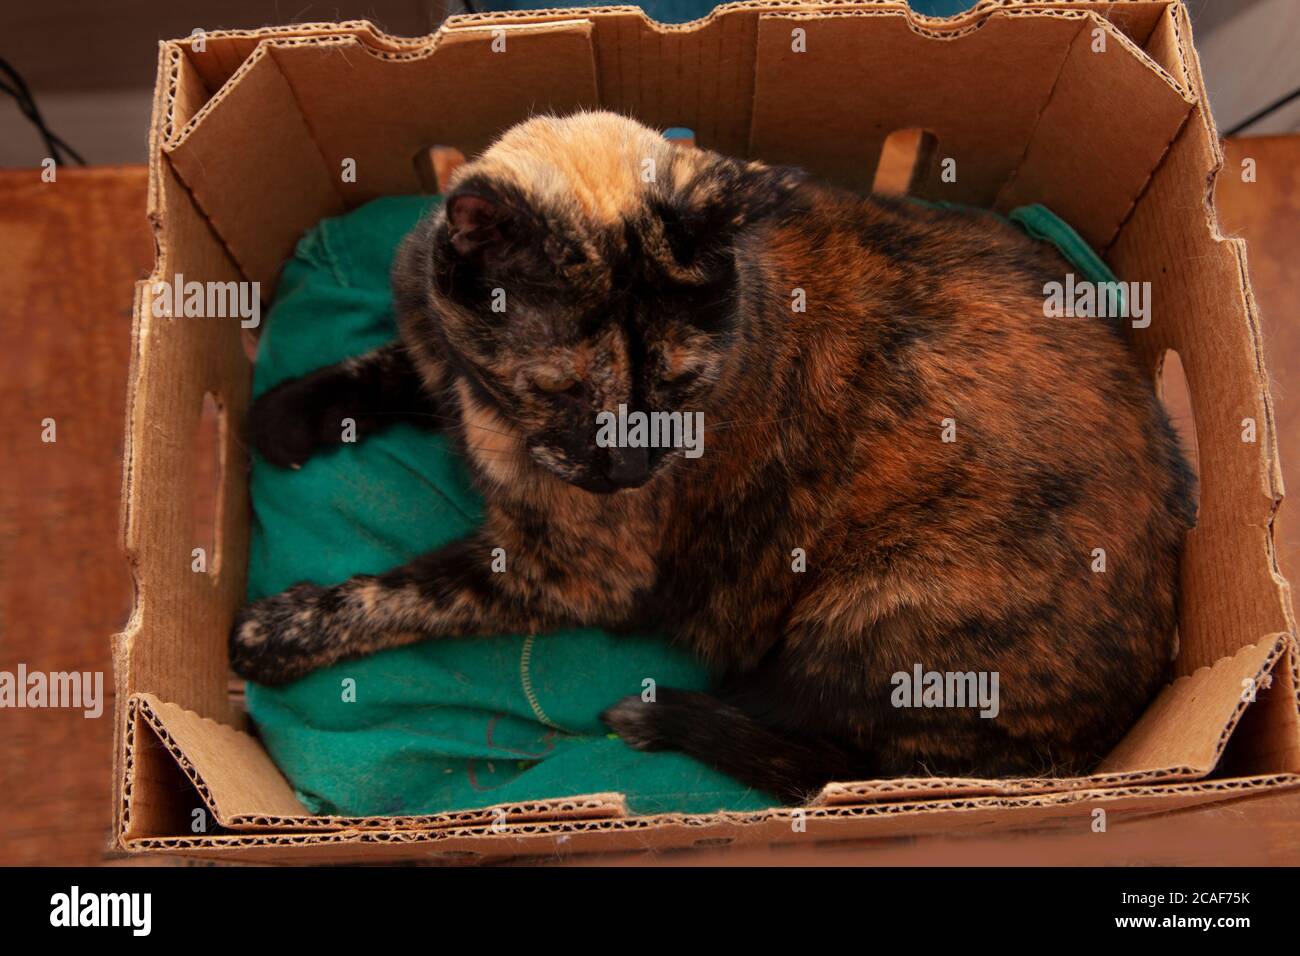 if it fits, i sits says black and orange cat in a cardboard box Stock Photo